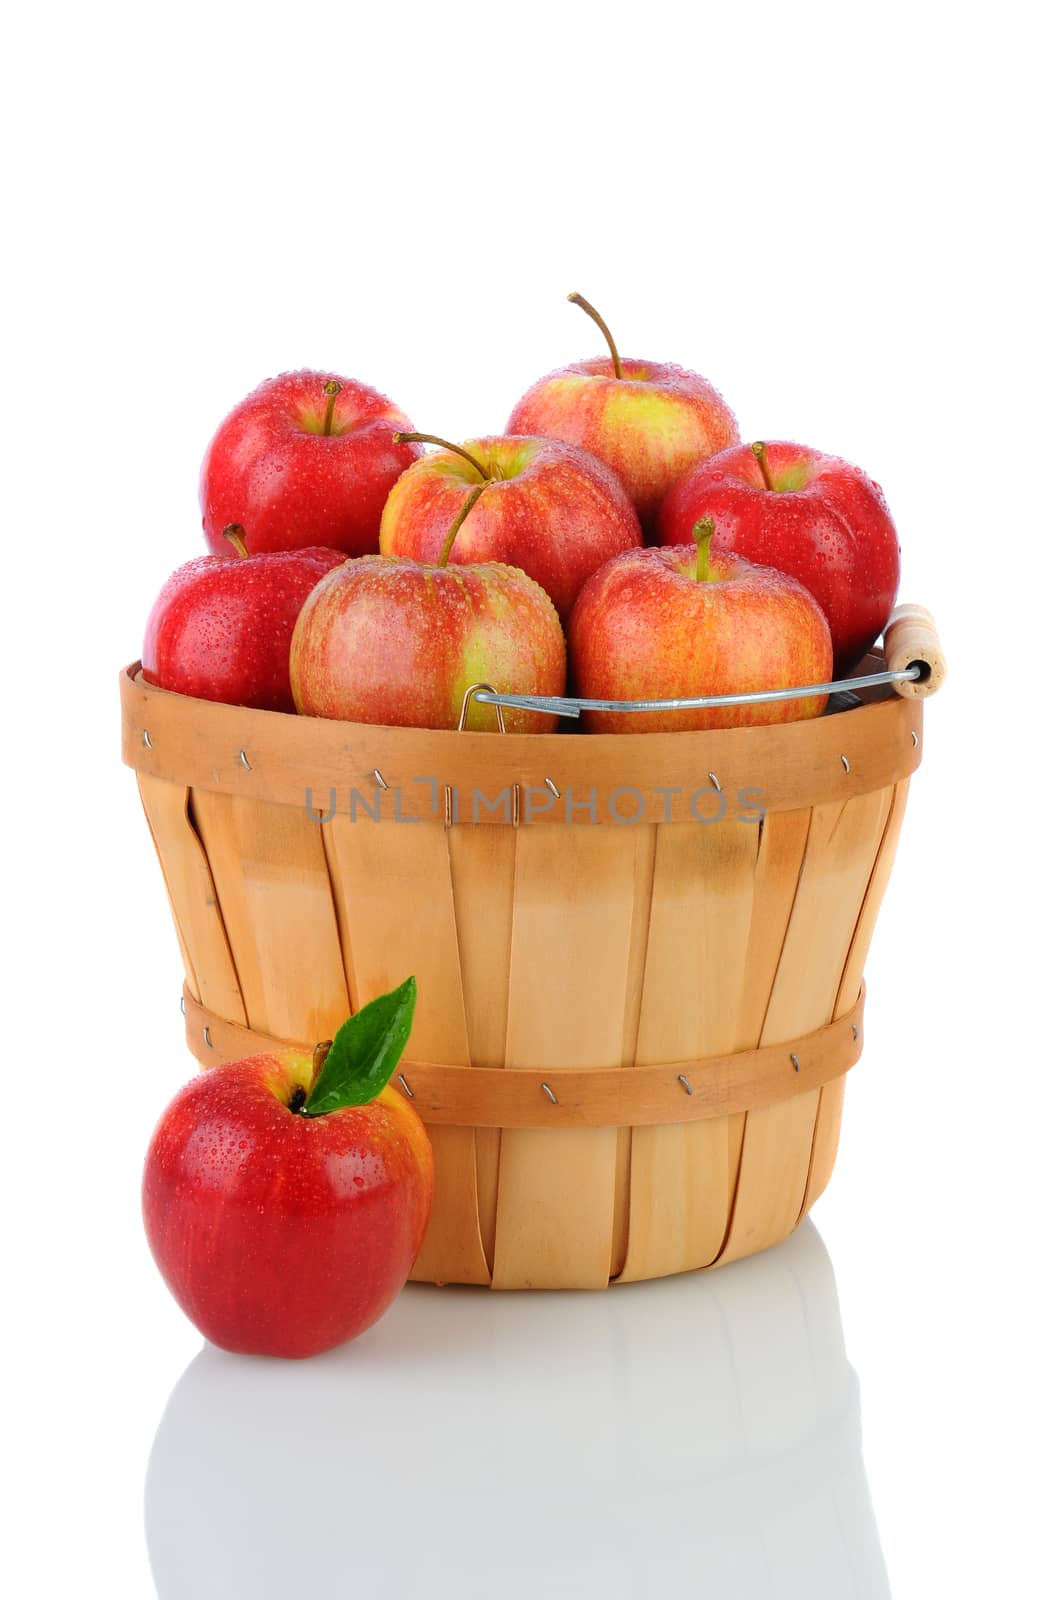 A basket full of fresh picked Gala Apples. Vertical format over a white background with reflection.